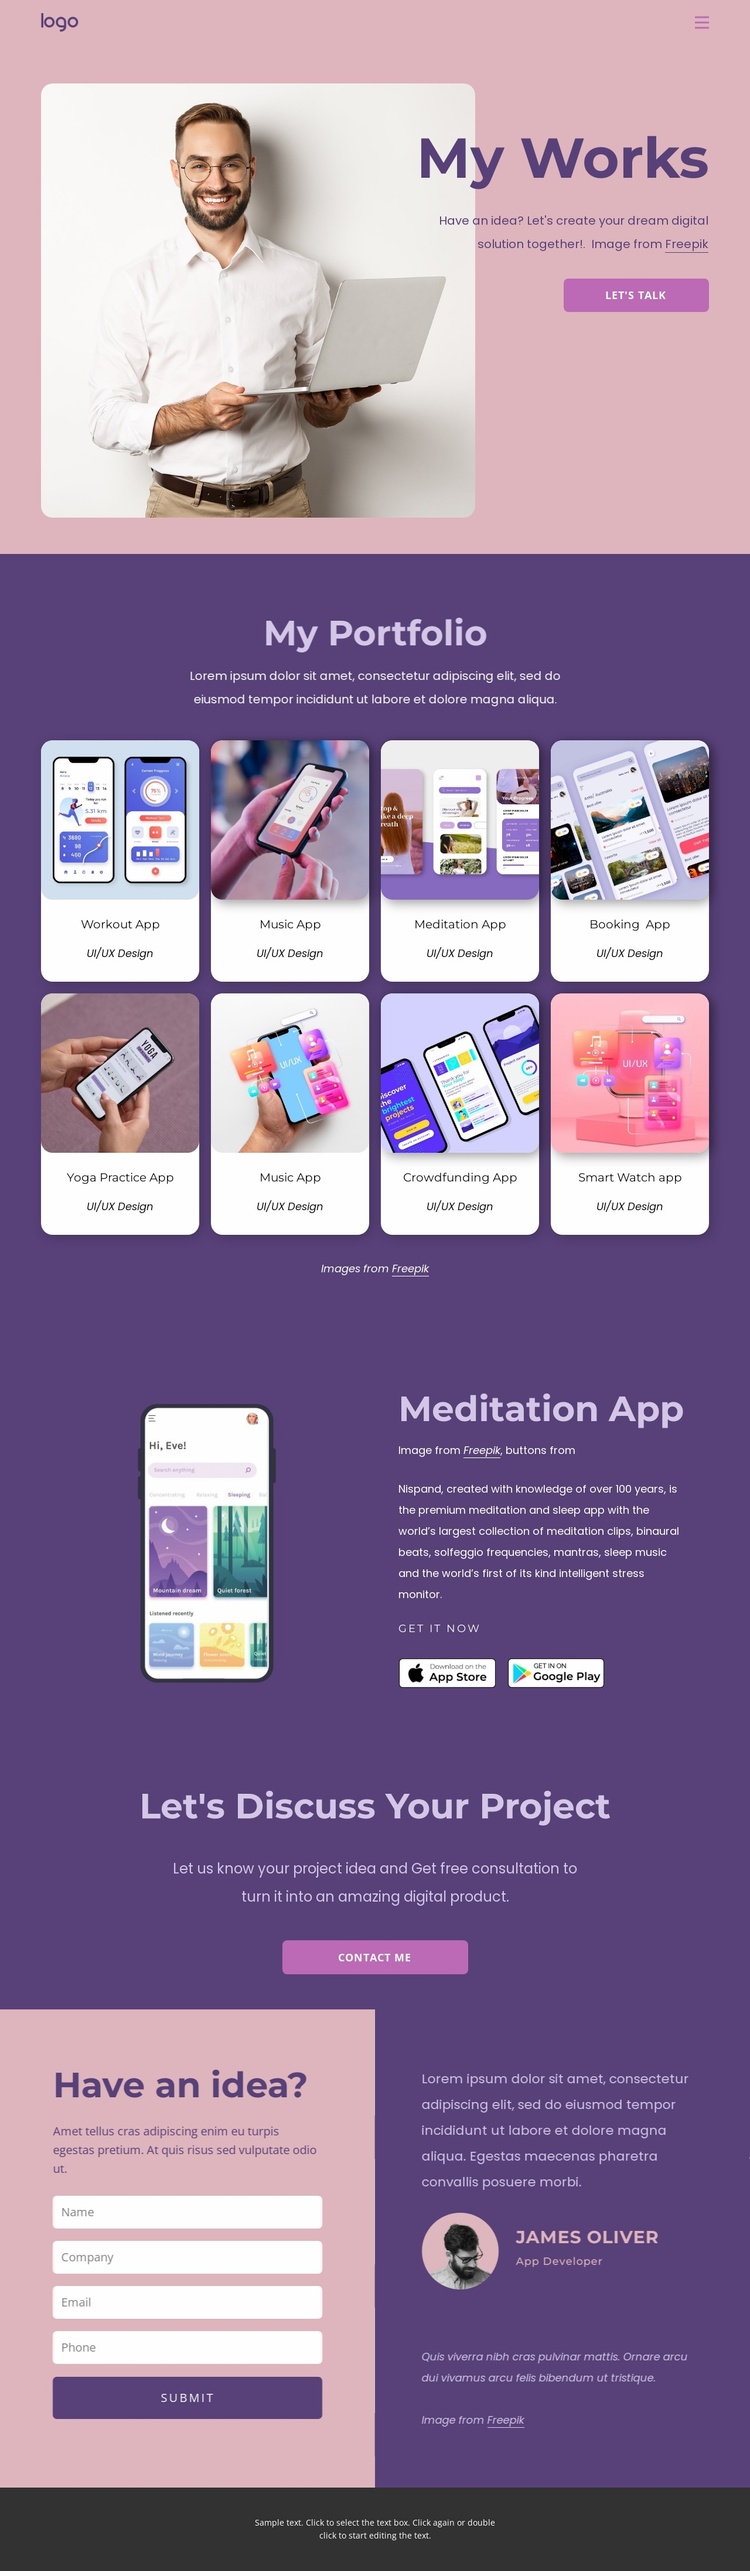 Custom iOS and Android apps for your business Website Template